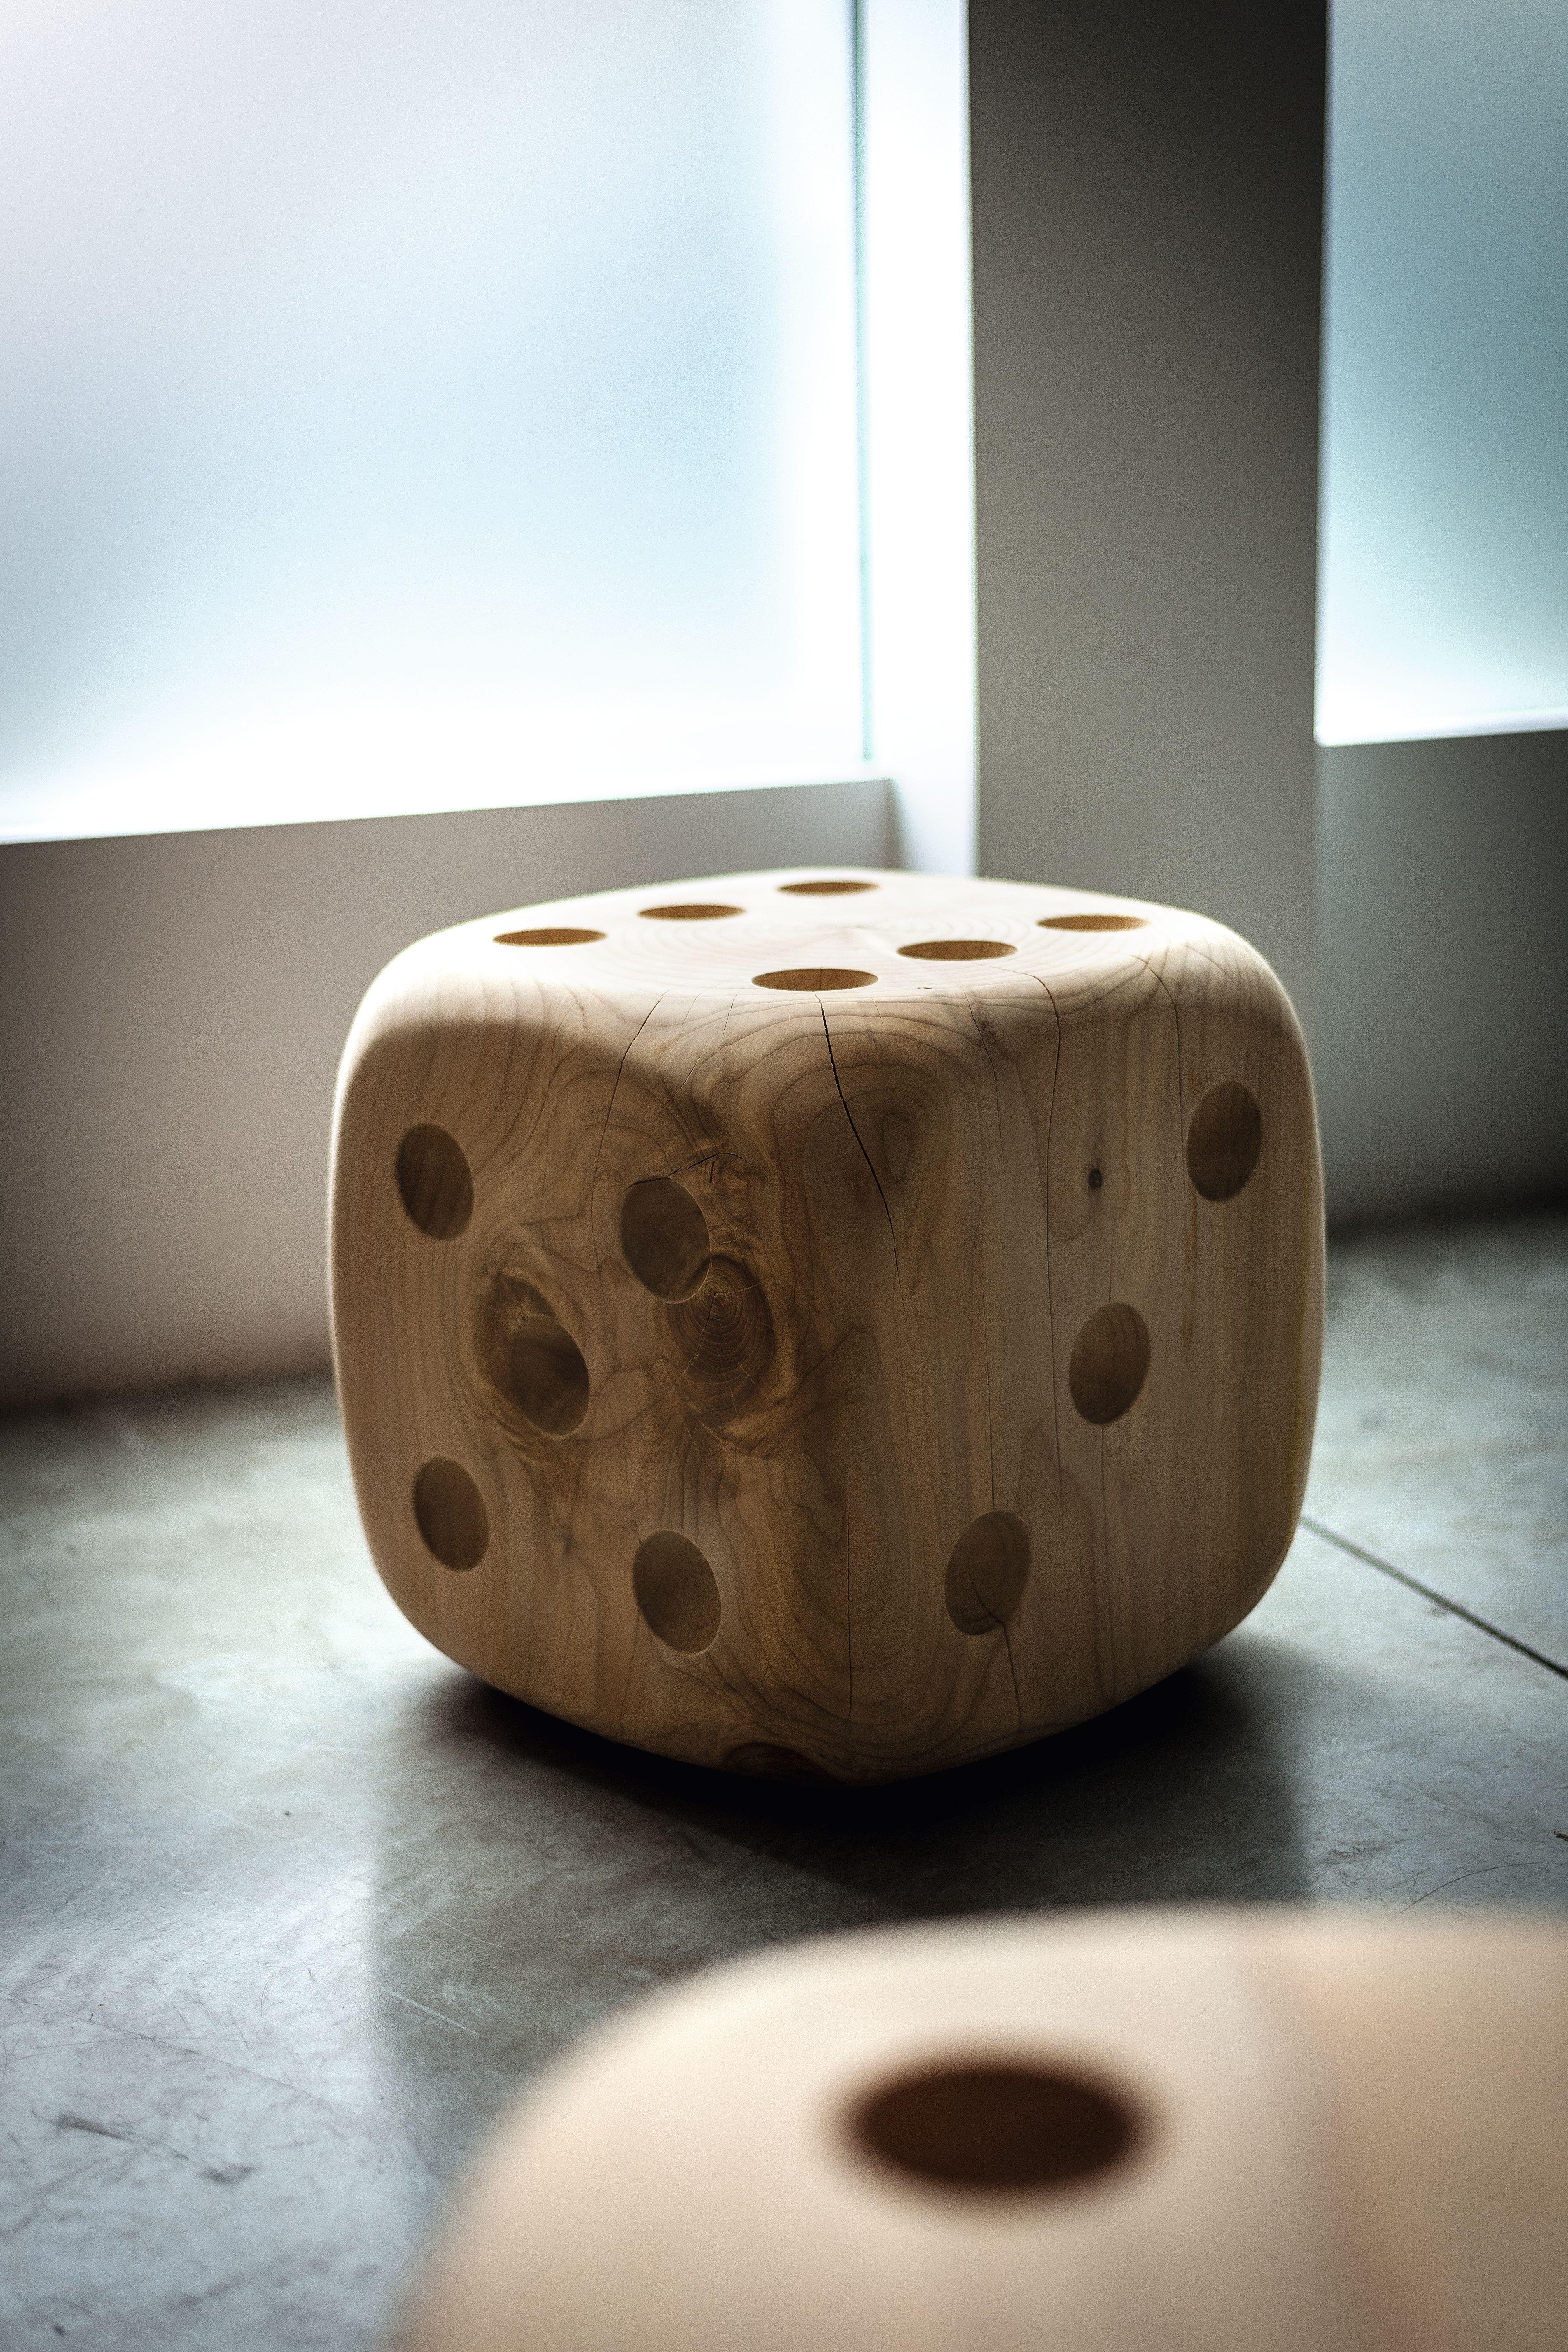 Stool made of a single block of scented cedar wood with clear references to the famous dice game.